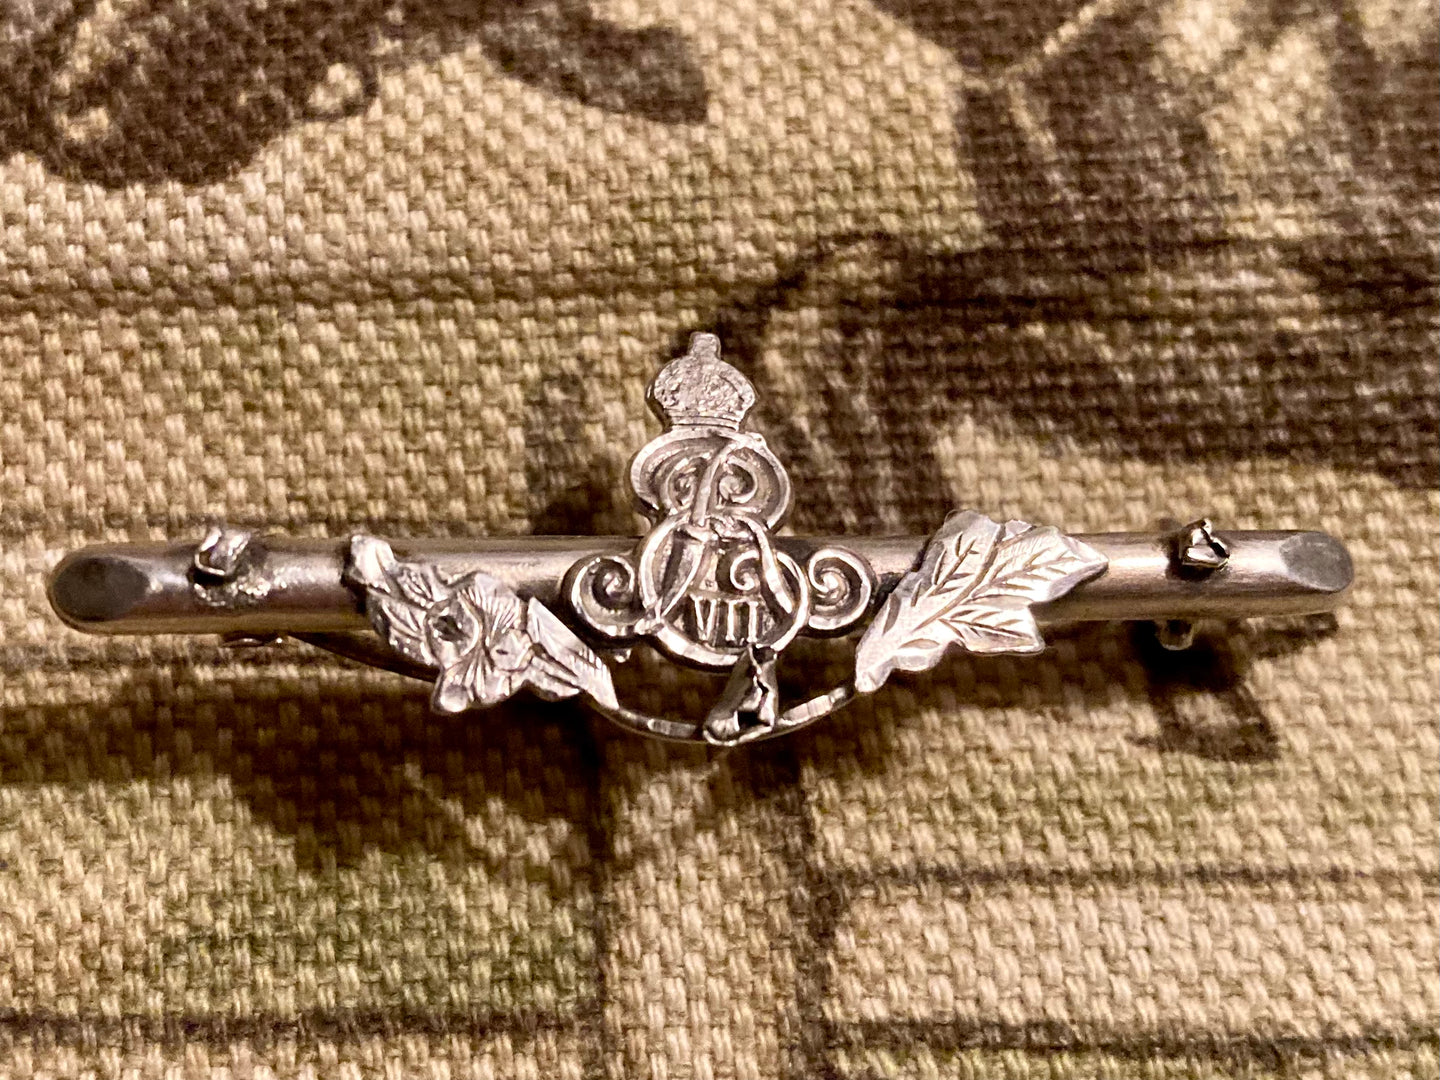 Brooch or Stock Pin